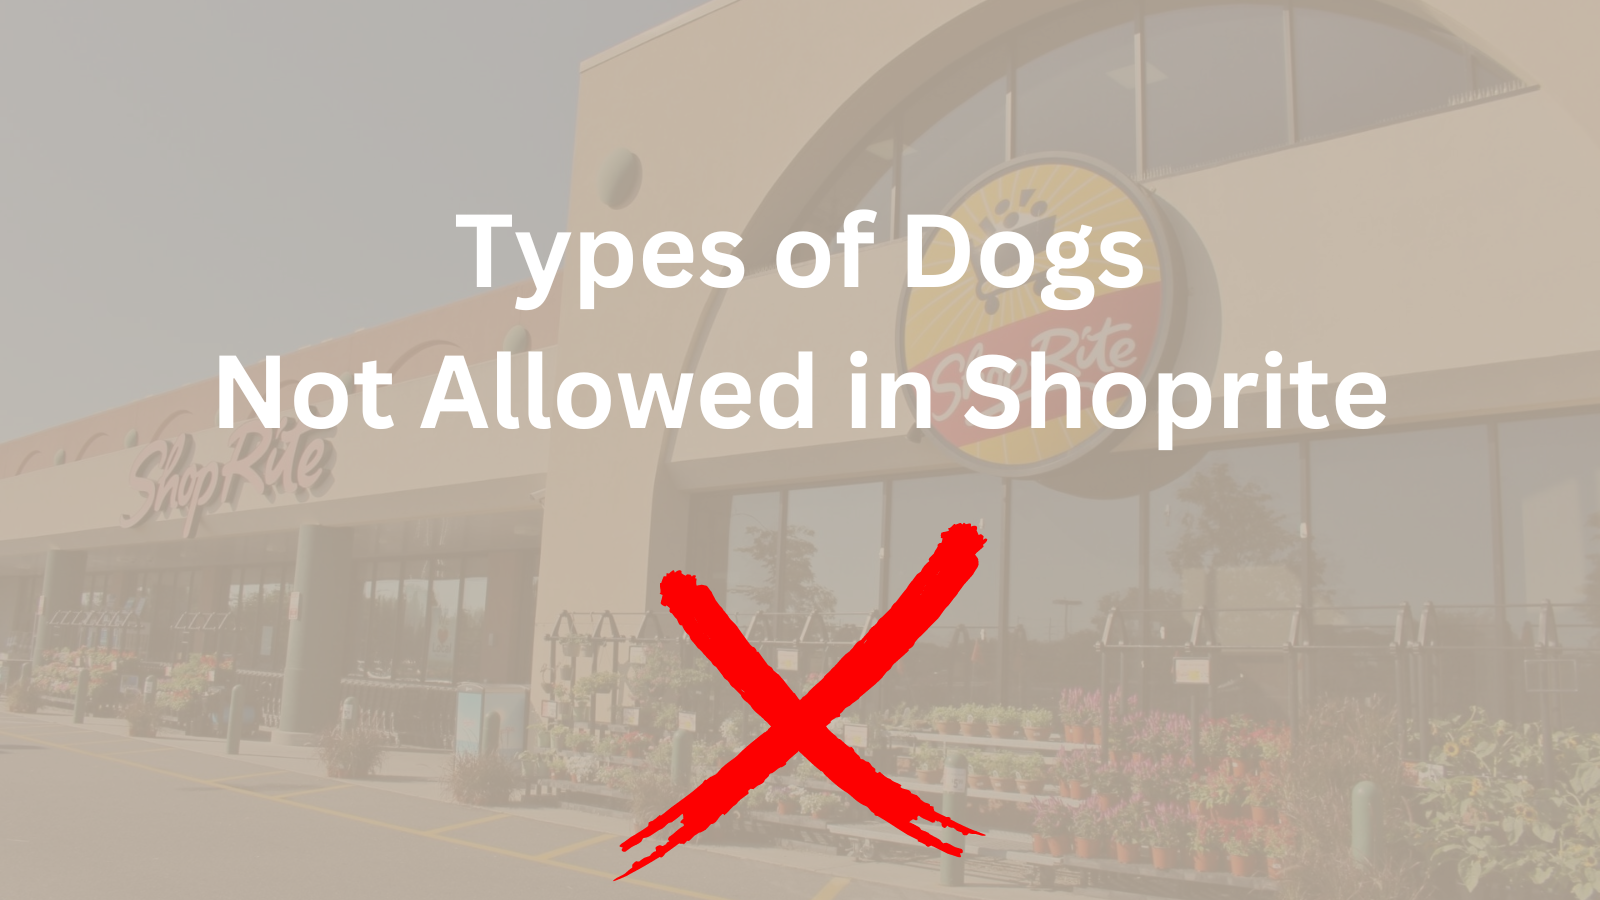 Image Text: "Types of Dogs Not Allowed in Shoprite"